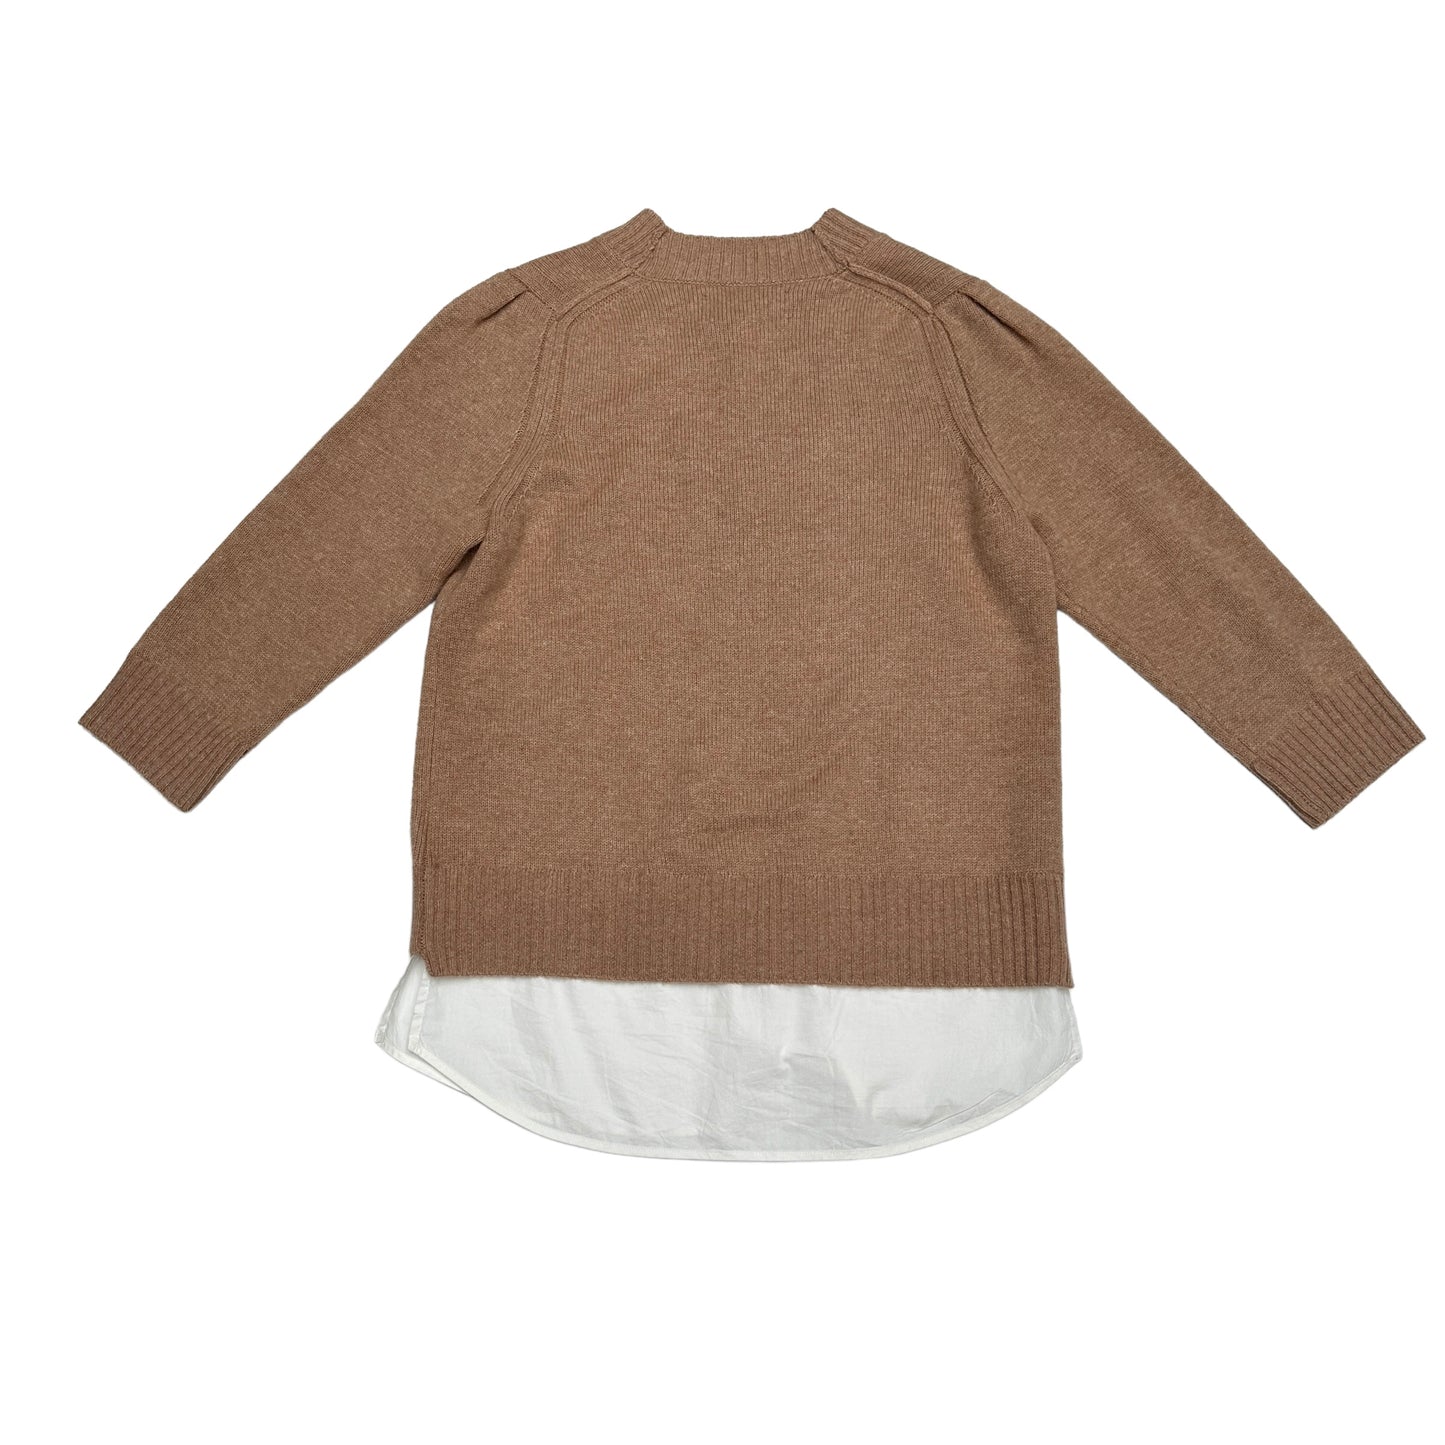 Beige Sweater with Shirt Detail - L